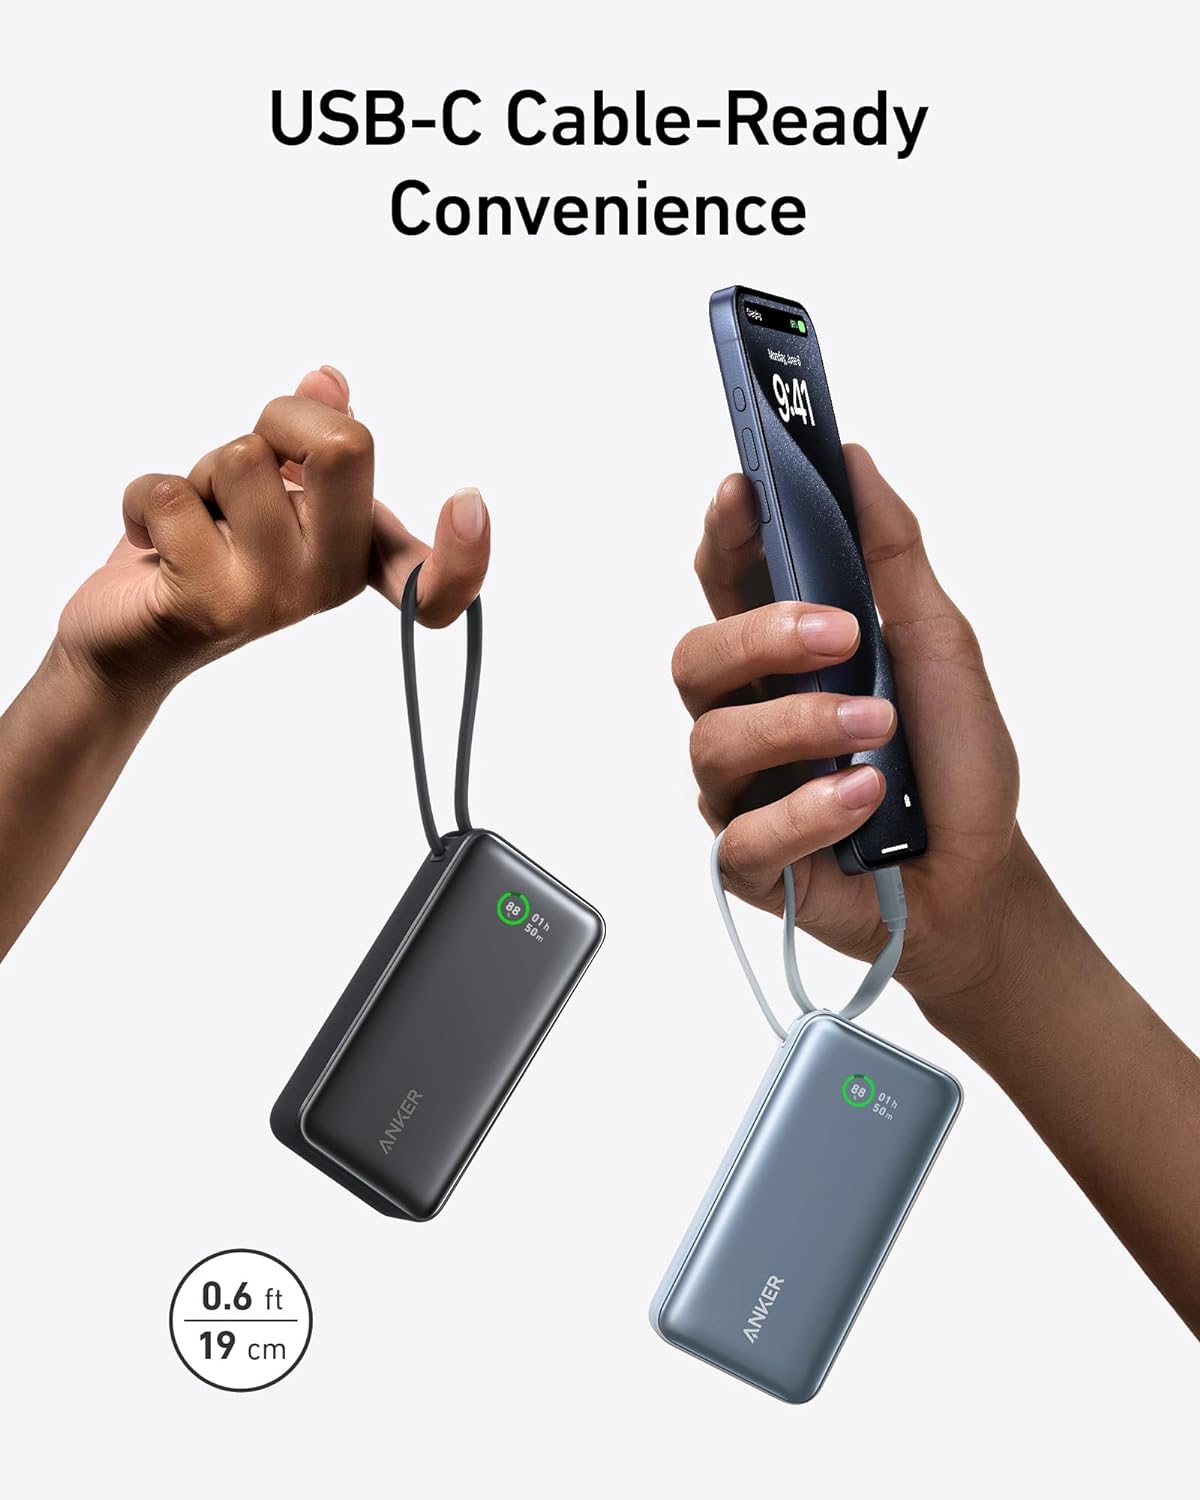 Anker Nano Power Bank, 10,000mAh Portable Charger with Built-in USB-C Cable, PD 30W Max Output with 1 USB-C, 1 USB-A